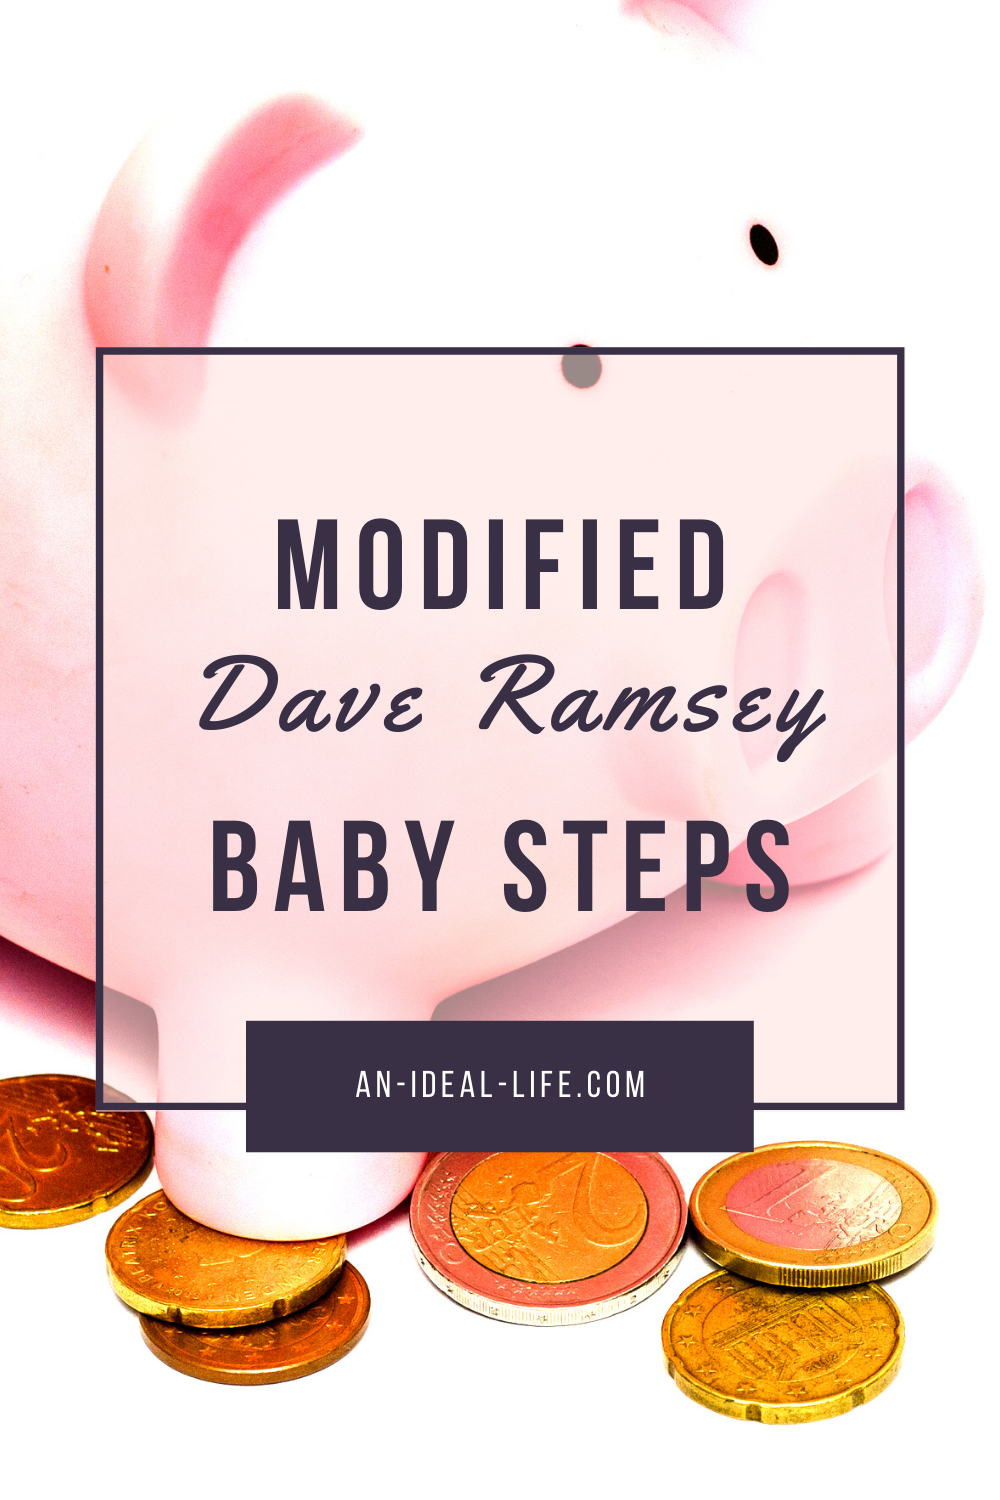 Modified Dave Ramsey Baby Steps